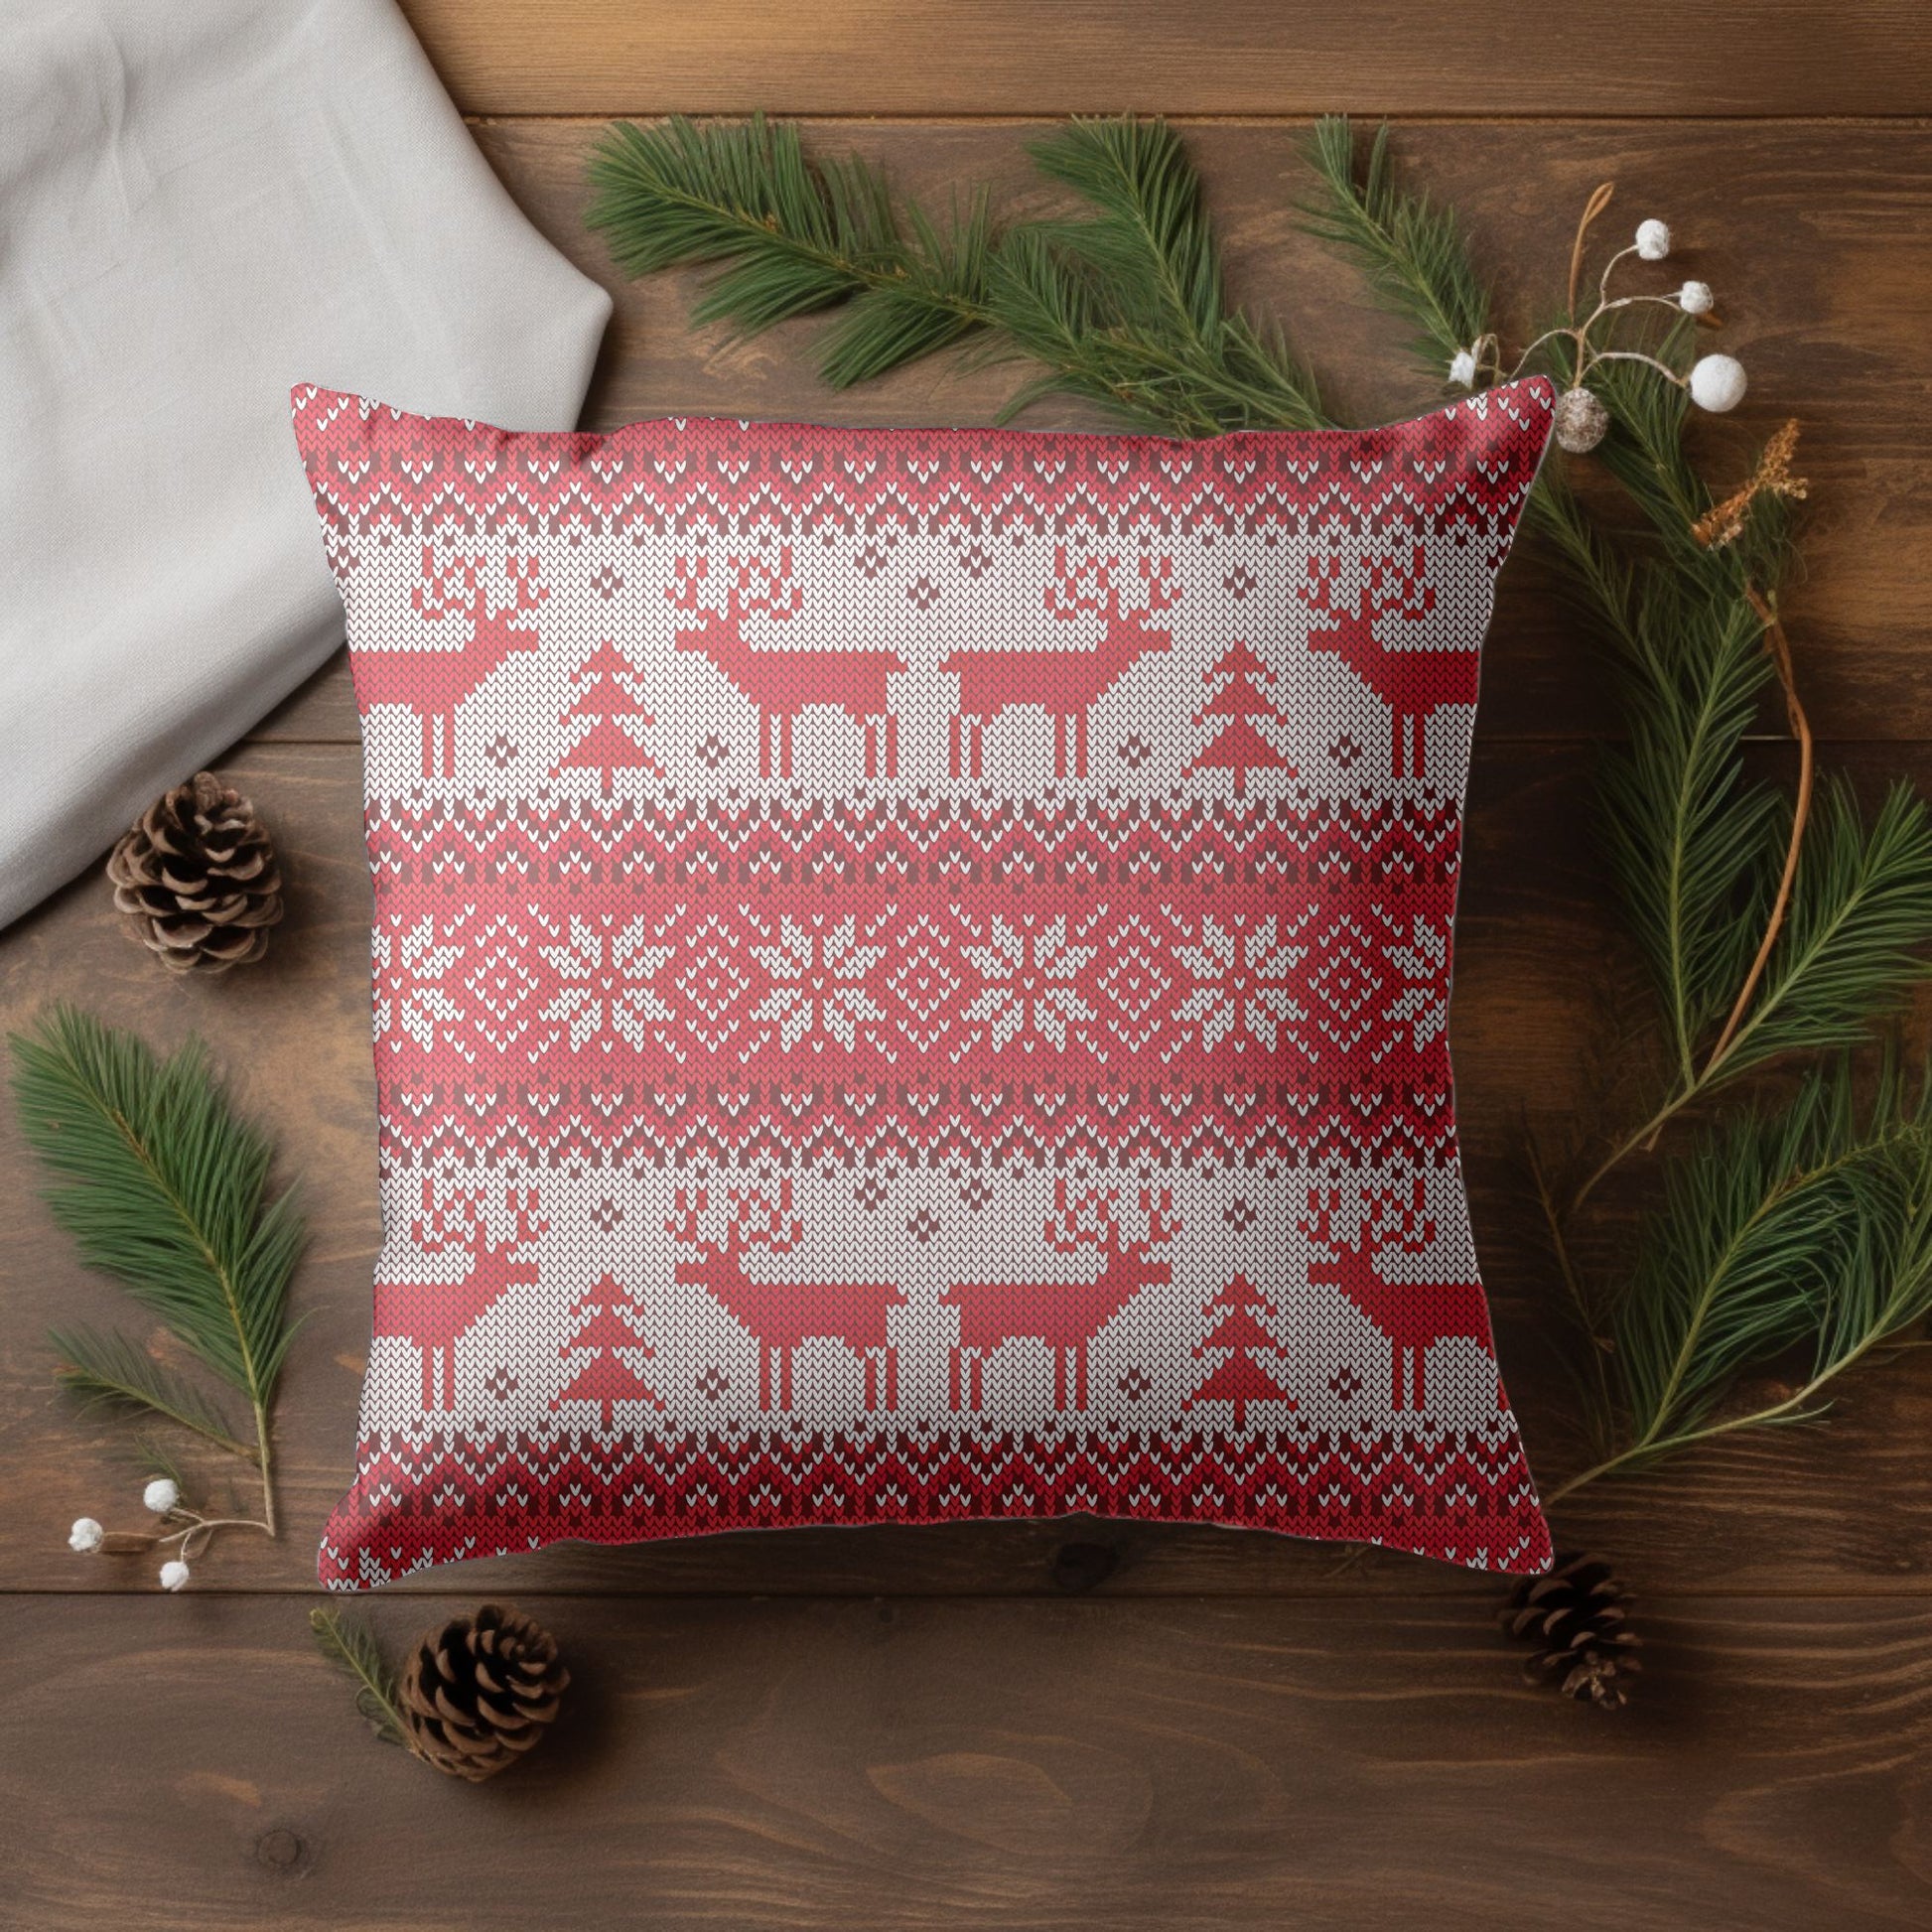 Reindeer Theme Pillow Cover for Holiday Cheer in Red